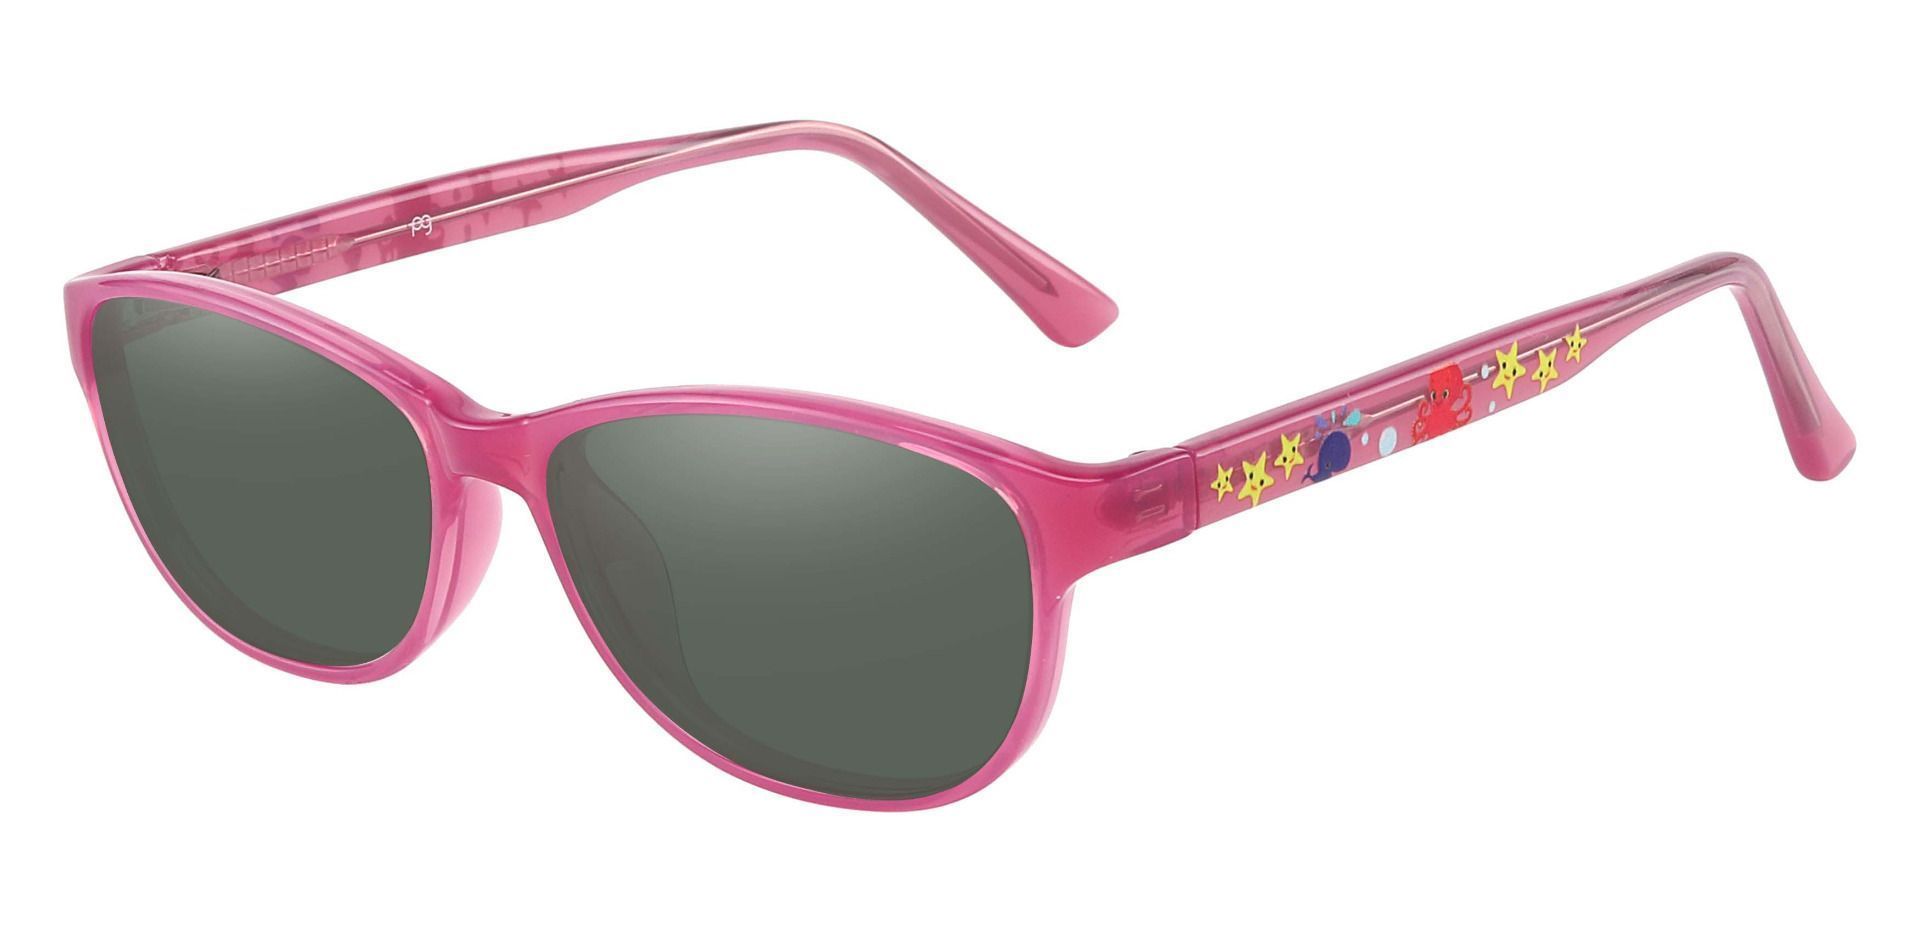 Patsy Oval Non-Rx Sunglasses - Pink Frame With Green Lenses